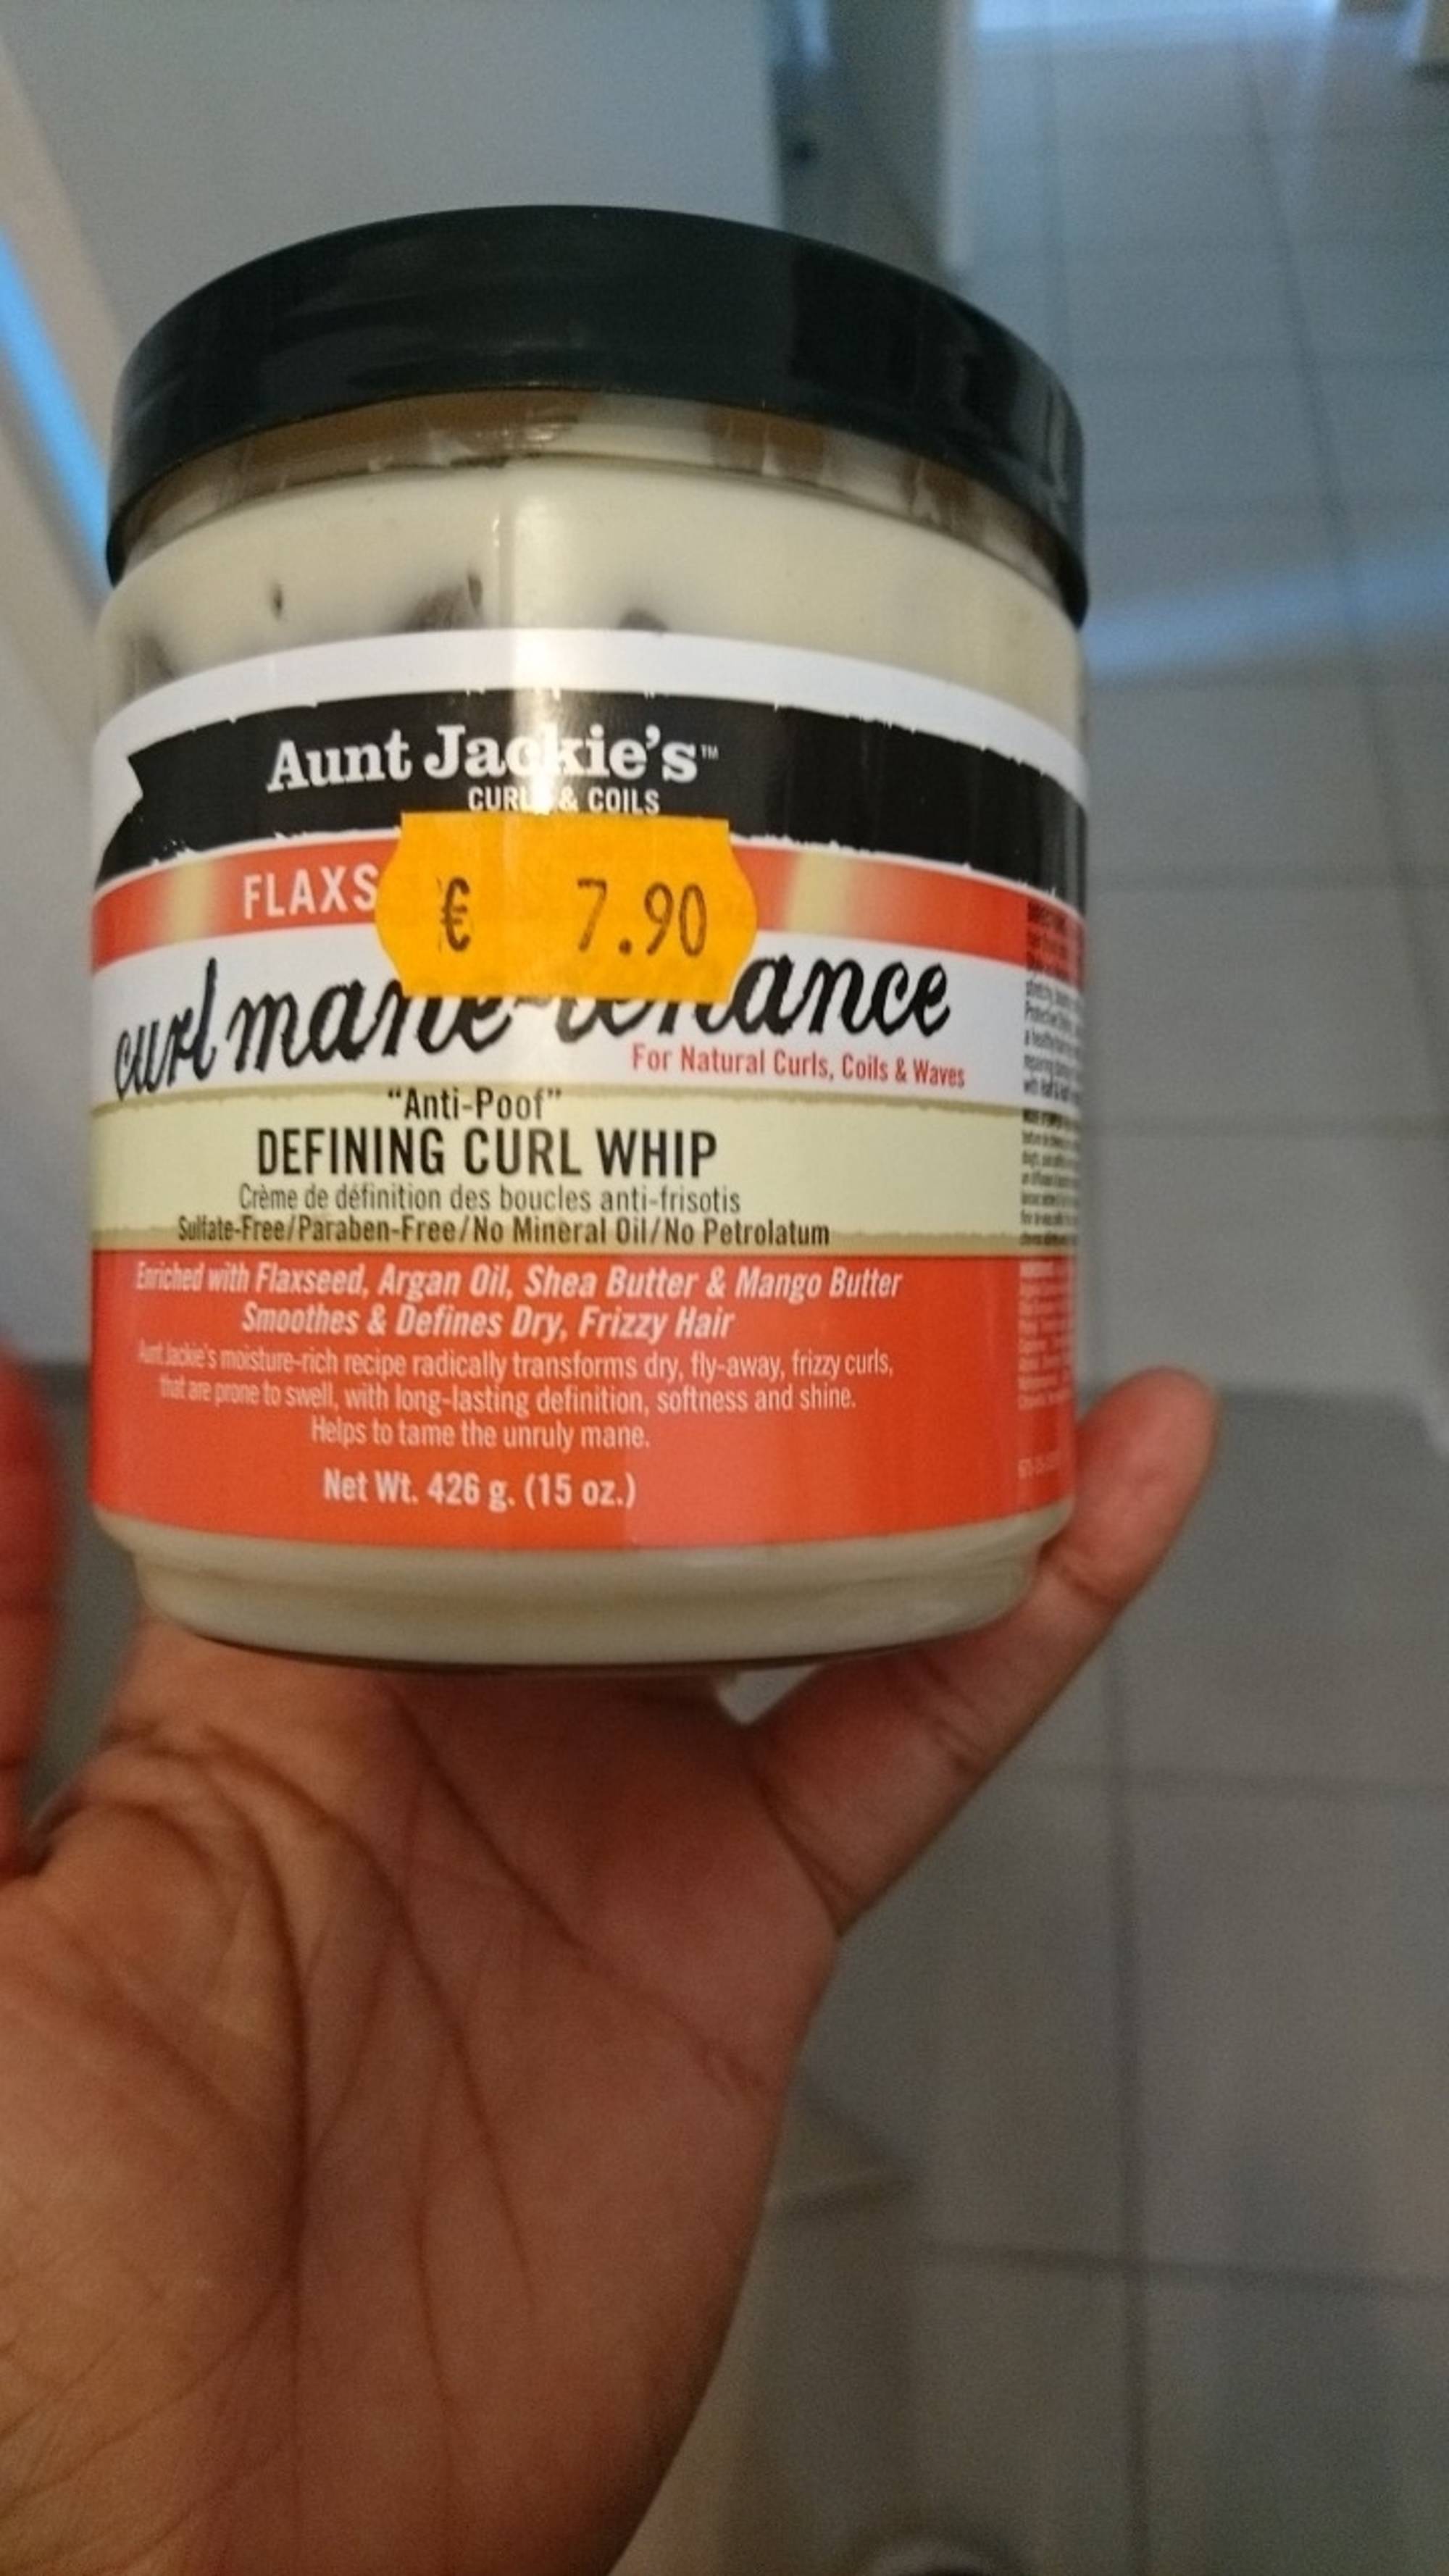 AUNT JACKIE'S - Curl mane-tenance - Anti-poof defining curl whip